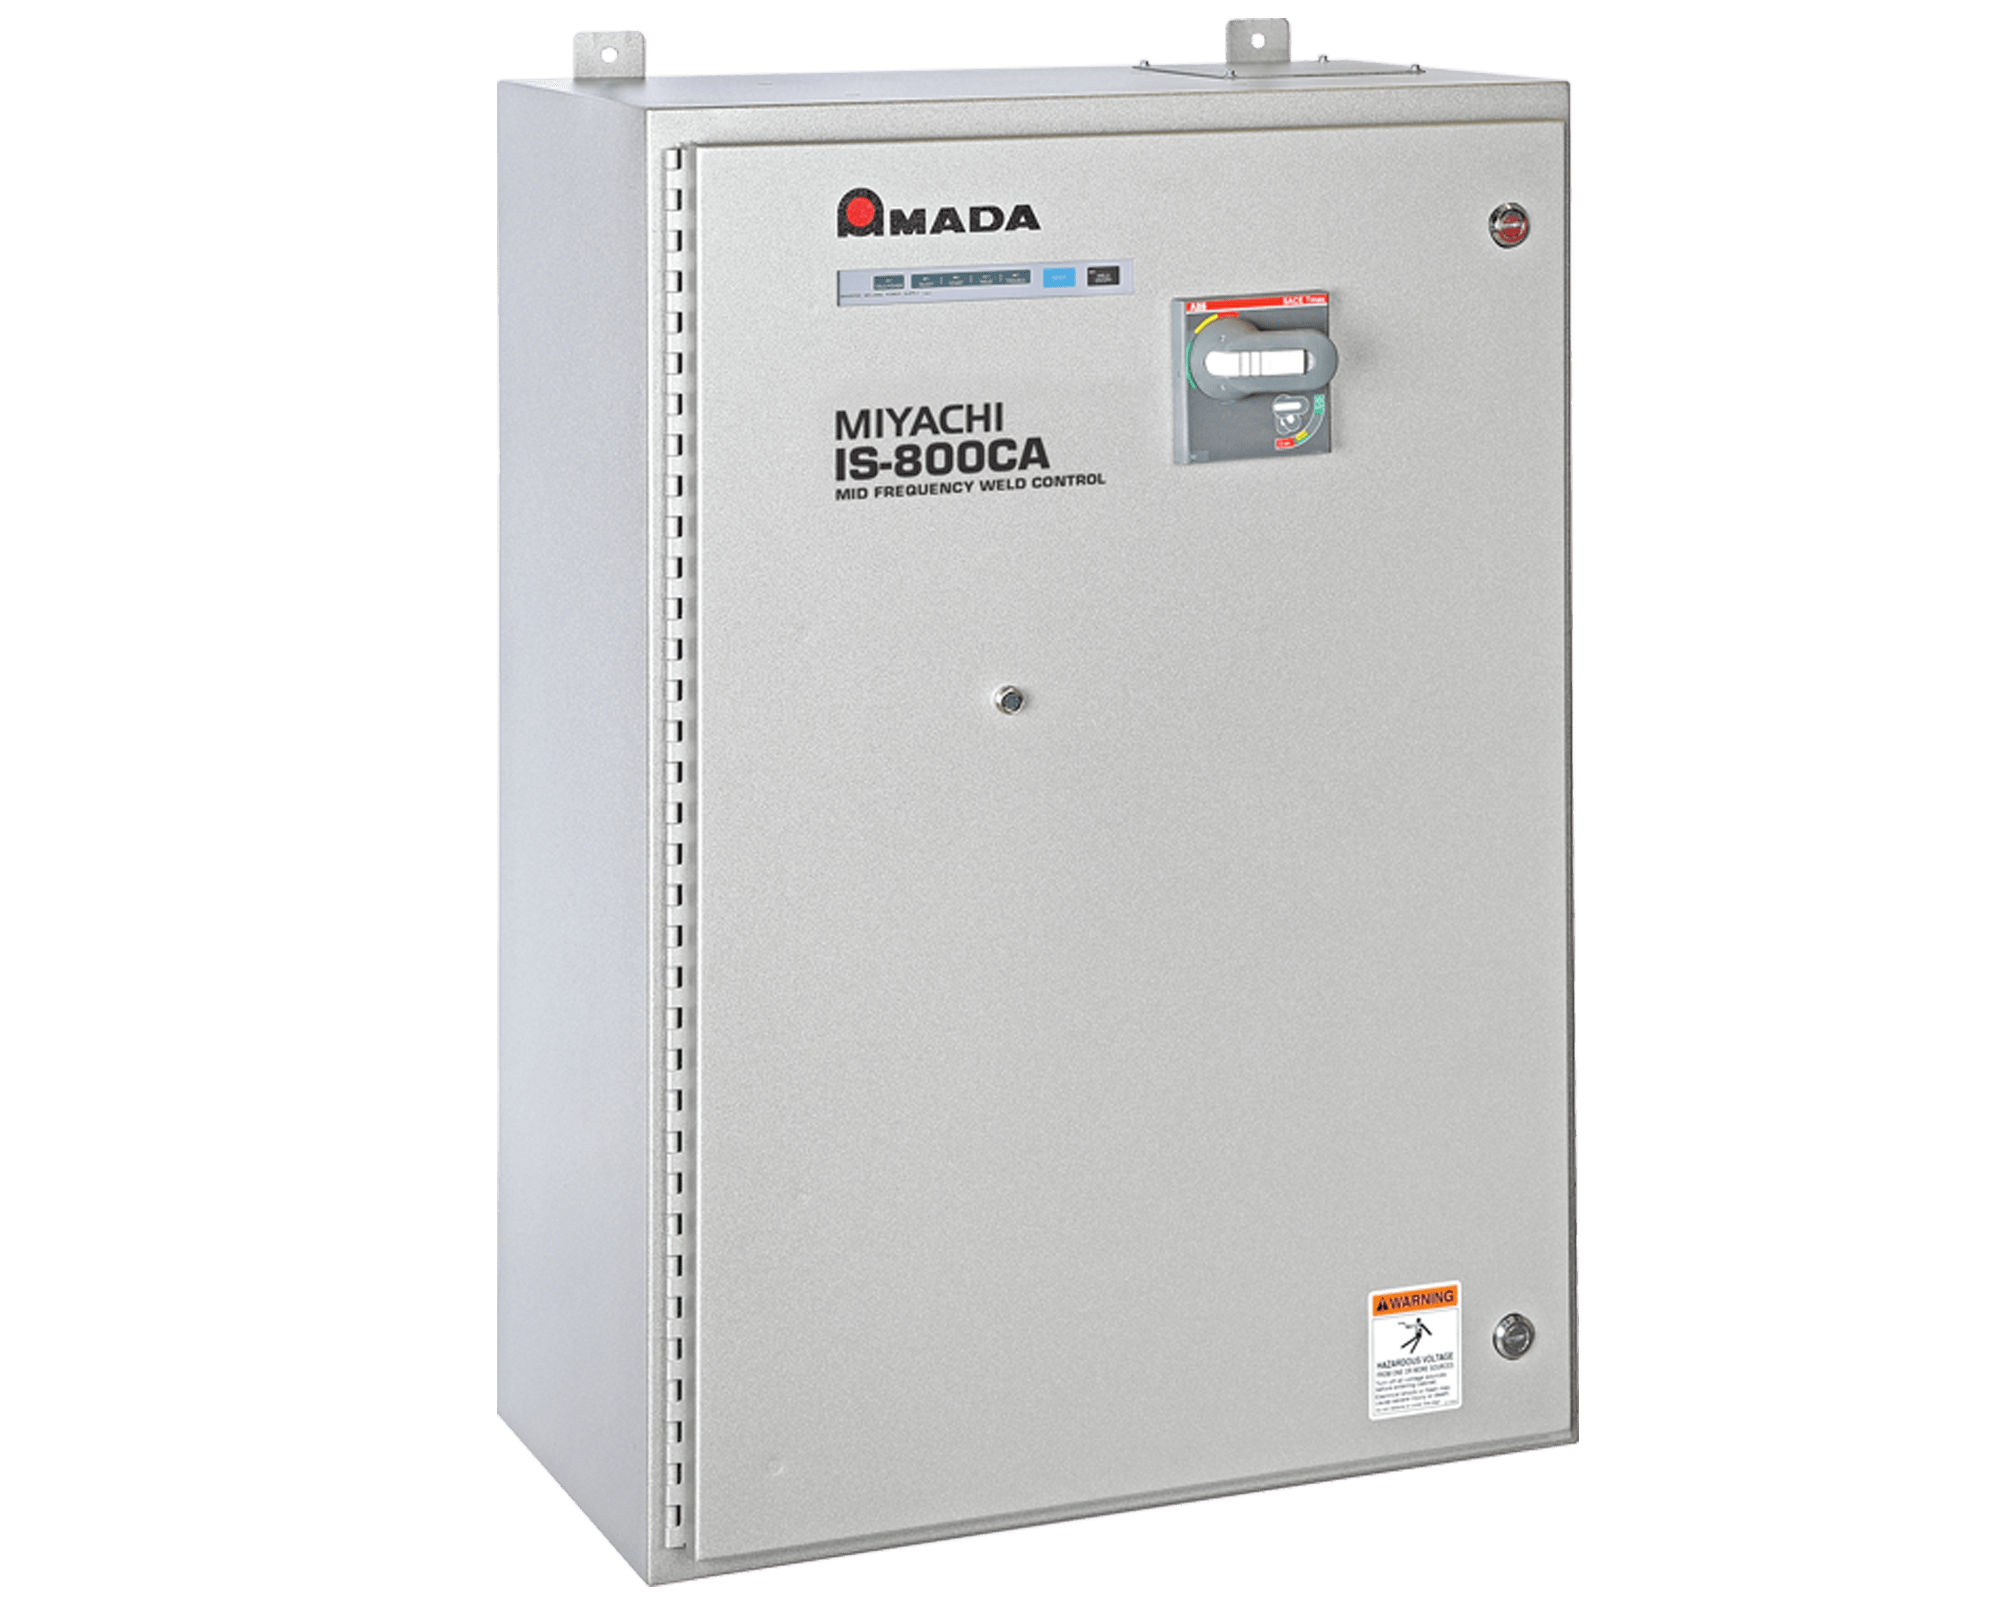 IS-800CA Mid Frequency Inverter Weld Control